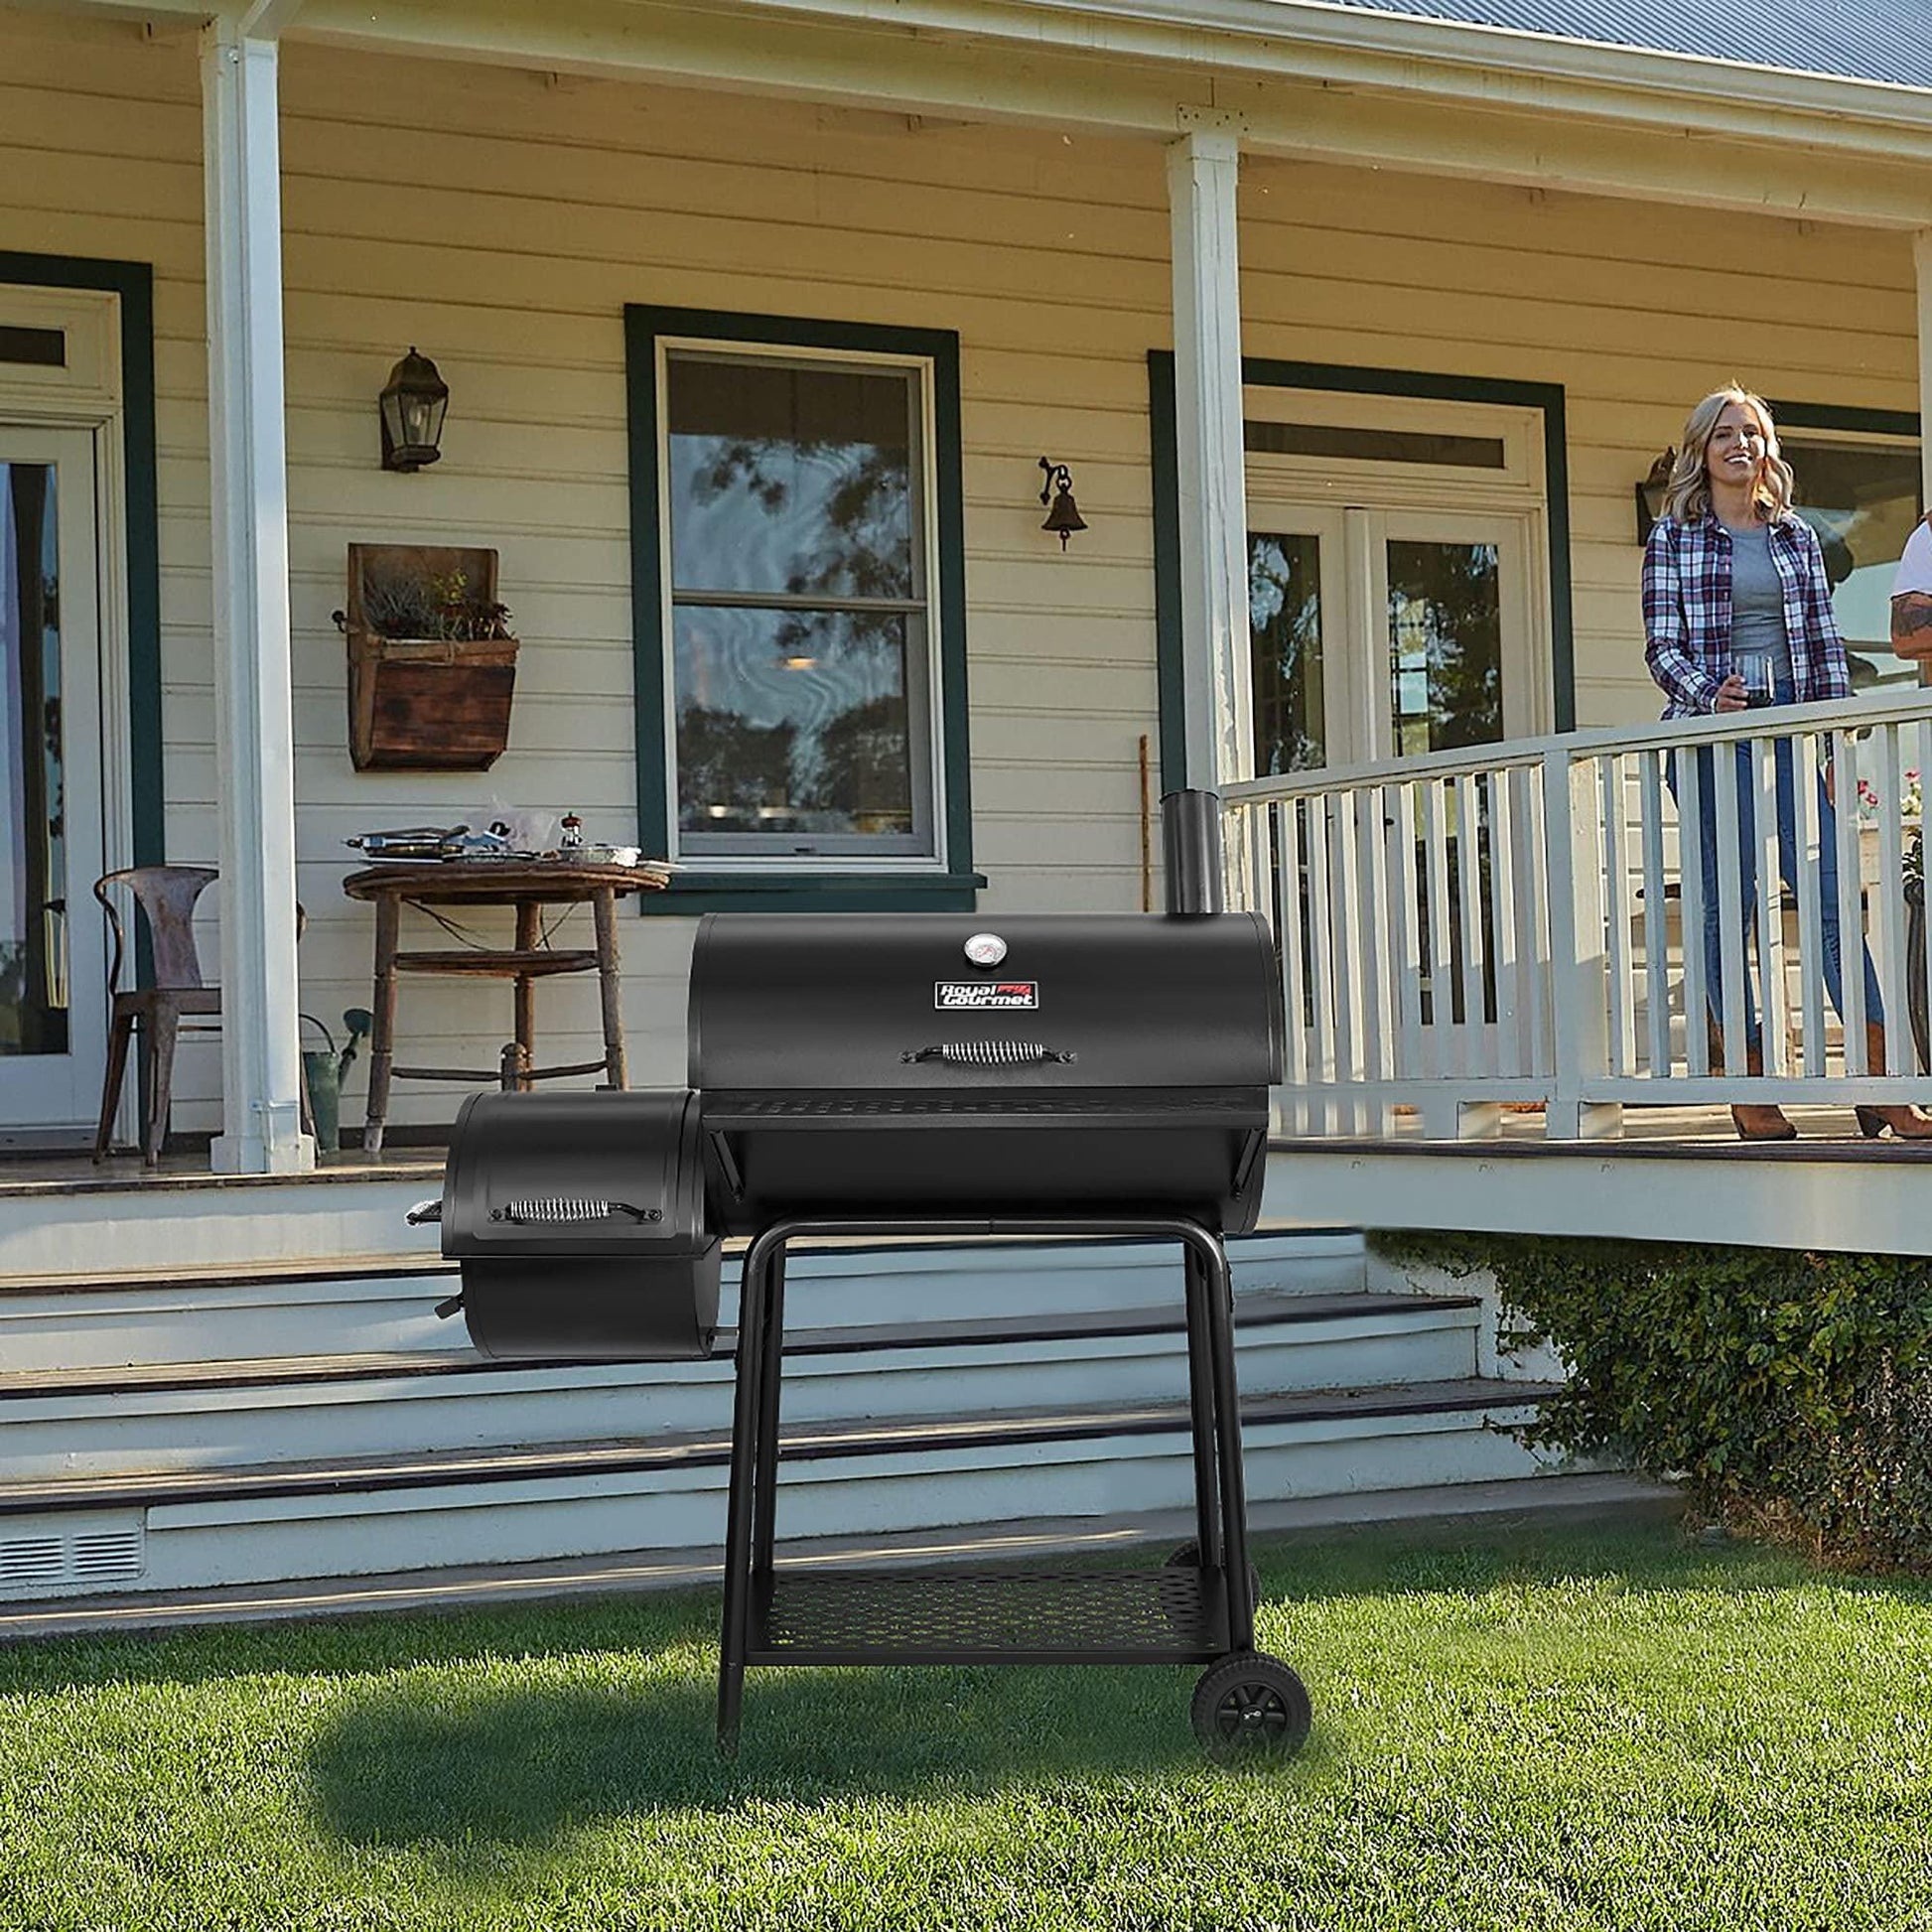 Royal Gourmet CC1830F Charcoal Grill with Offset Smoker, Black - CookCave